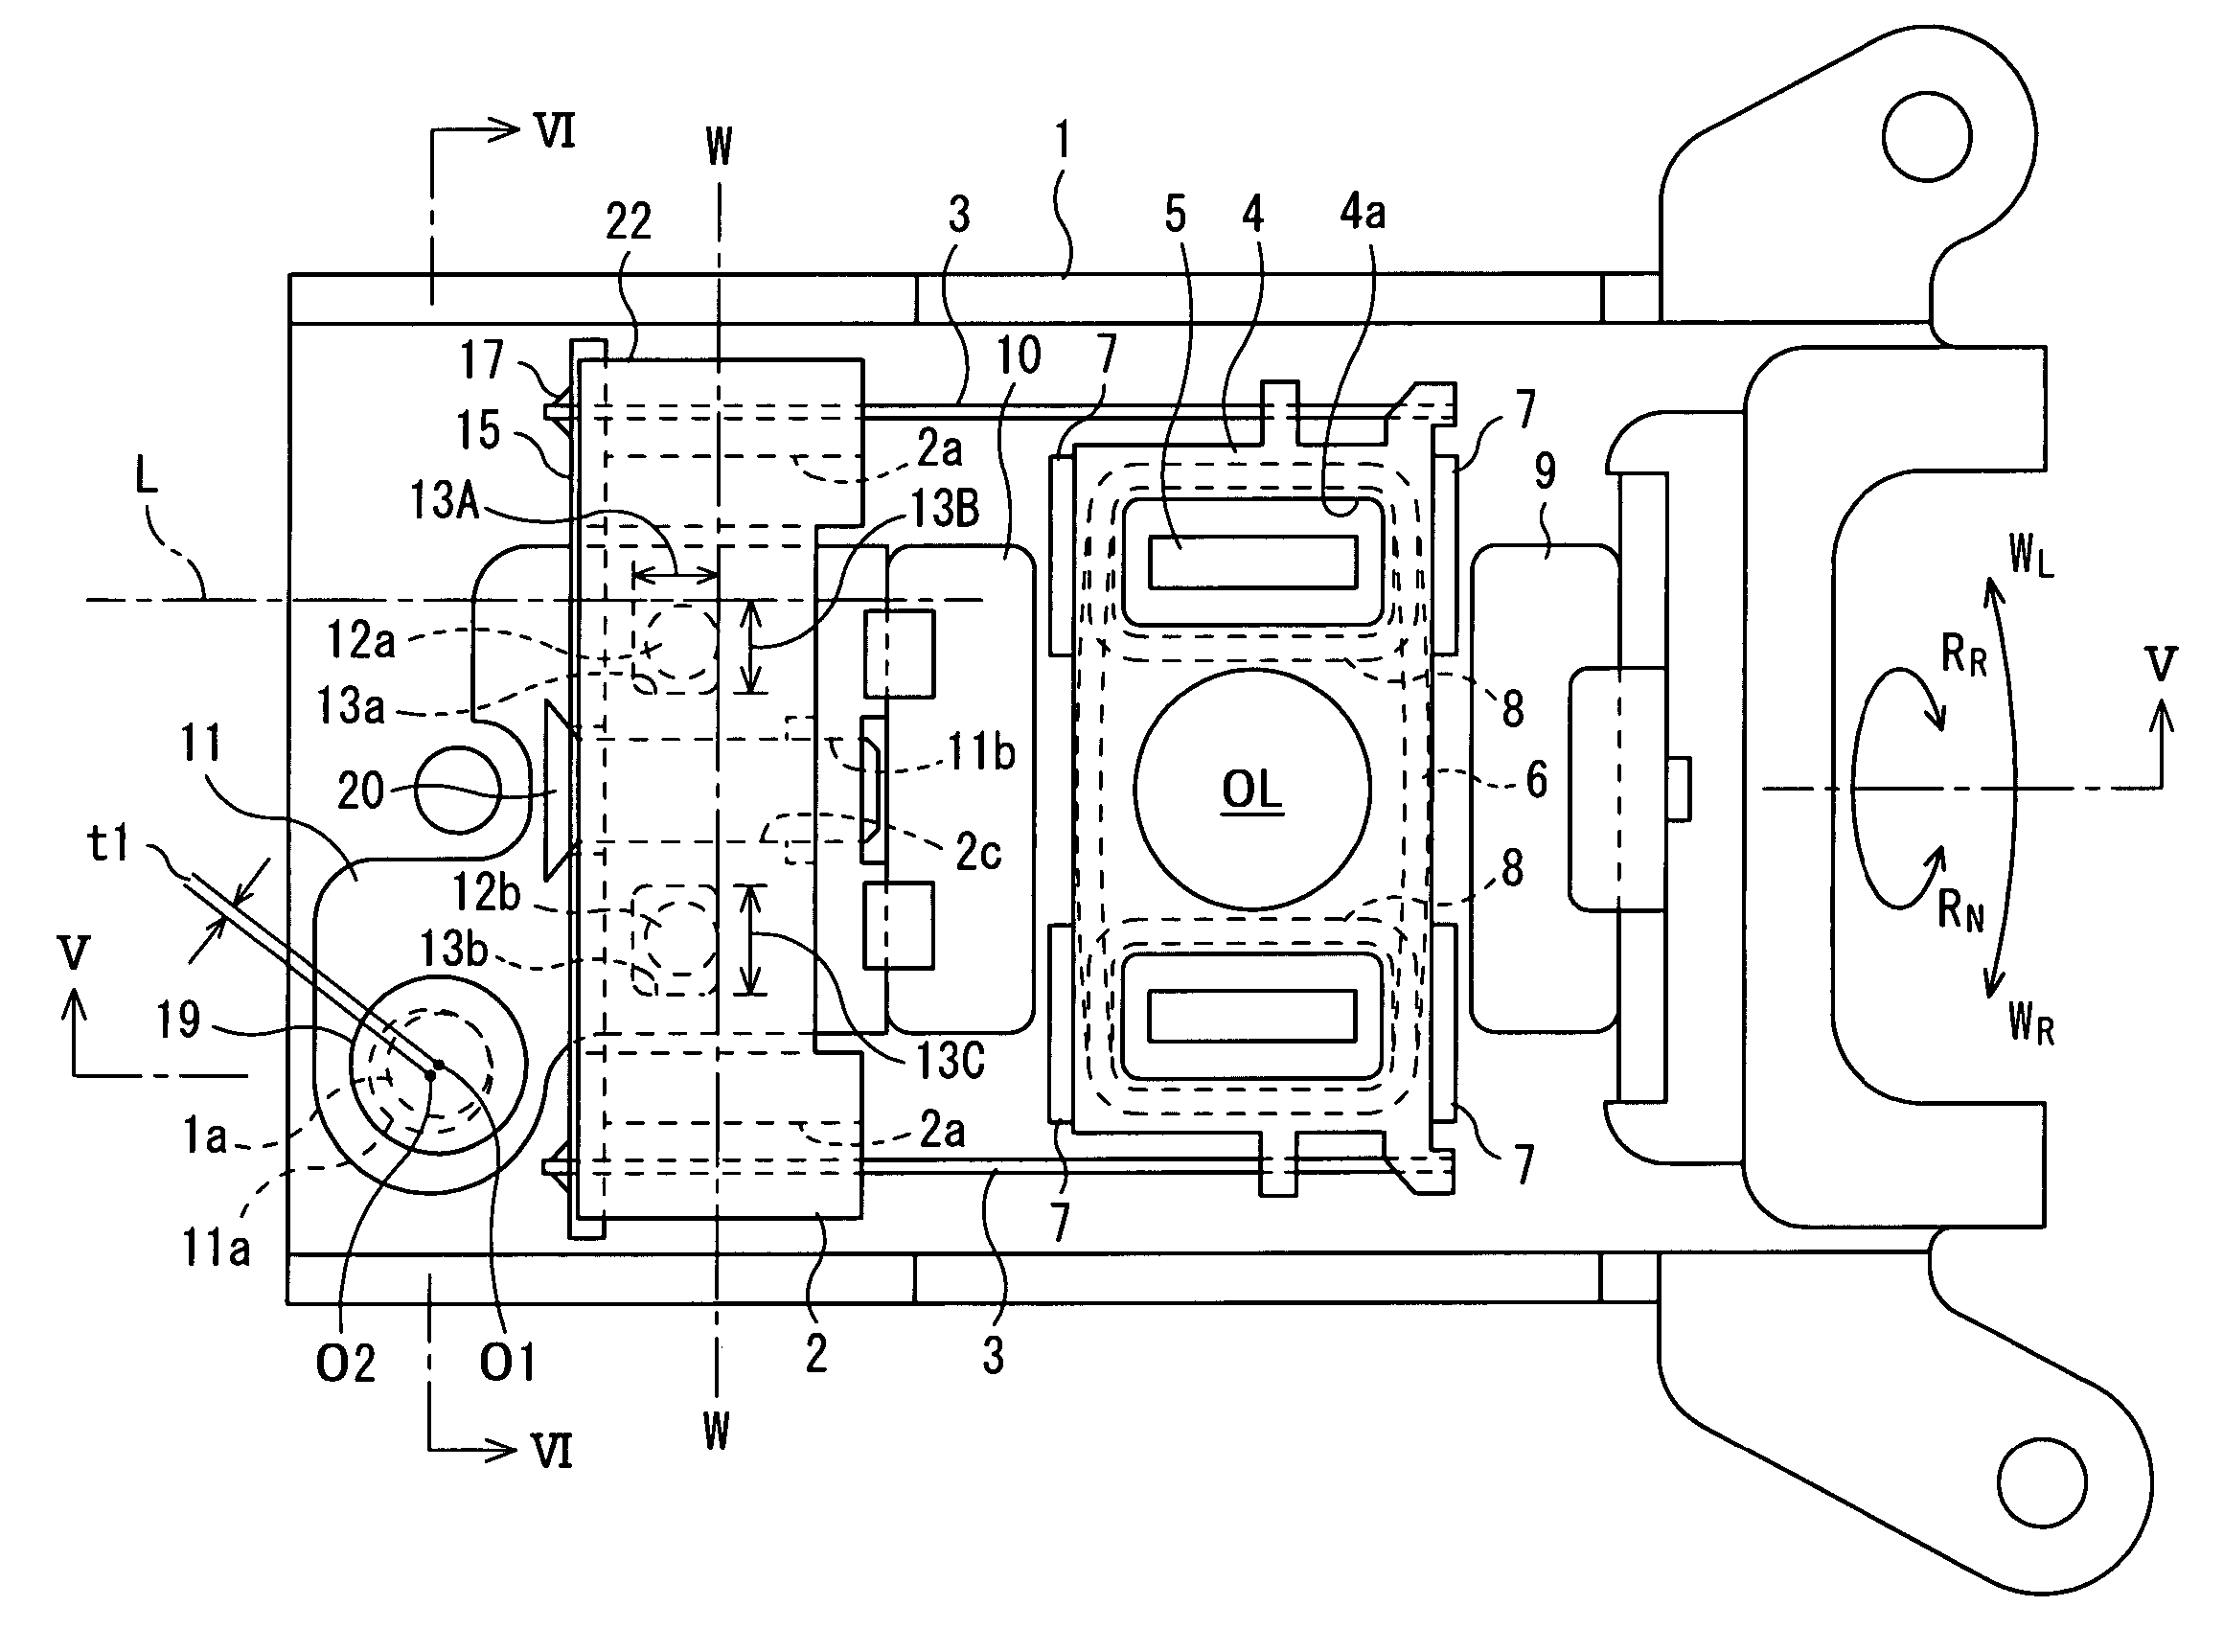 Optical pick-up device with respective flush screws eccentrically positioned between an actuator base and a magnetic holder, together between a printed-circuit board and a support member